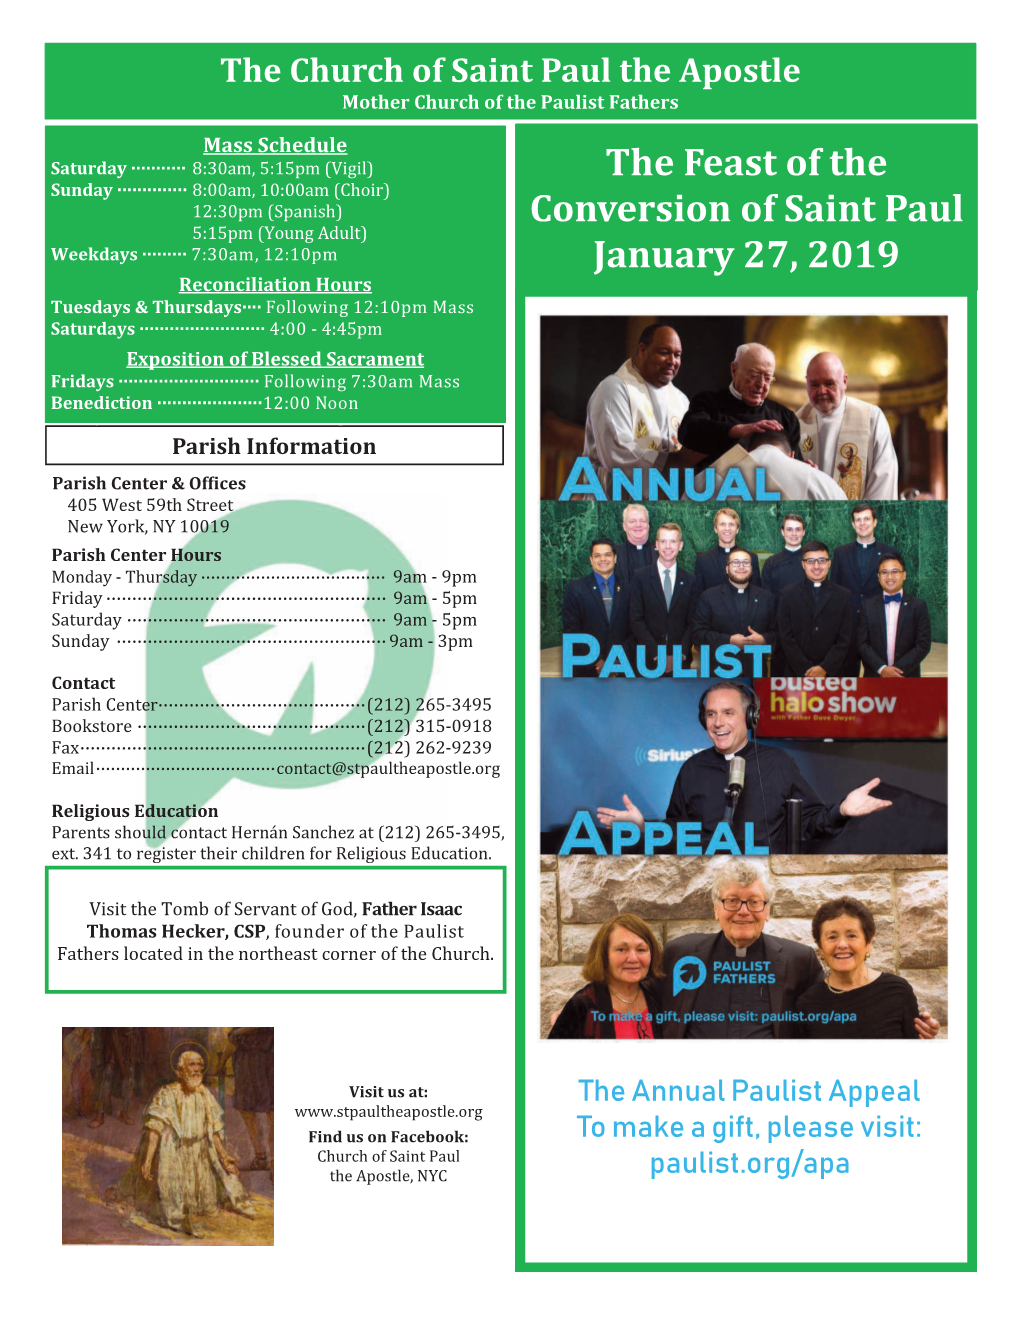 The Feast of the Conversion of Saint Paul January 27, 2019